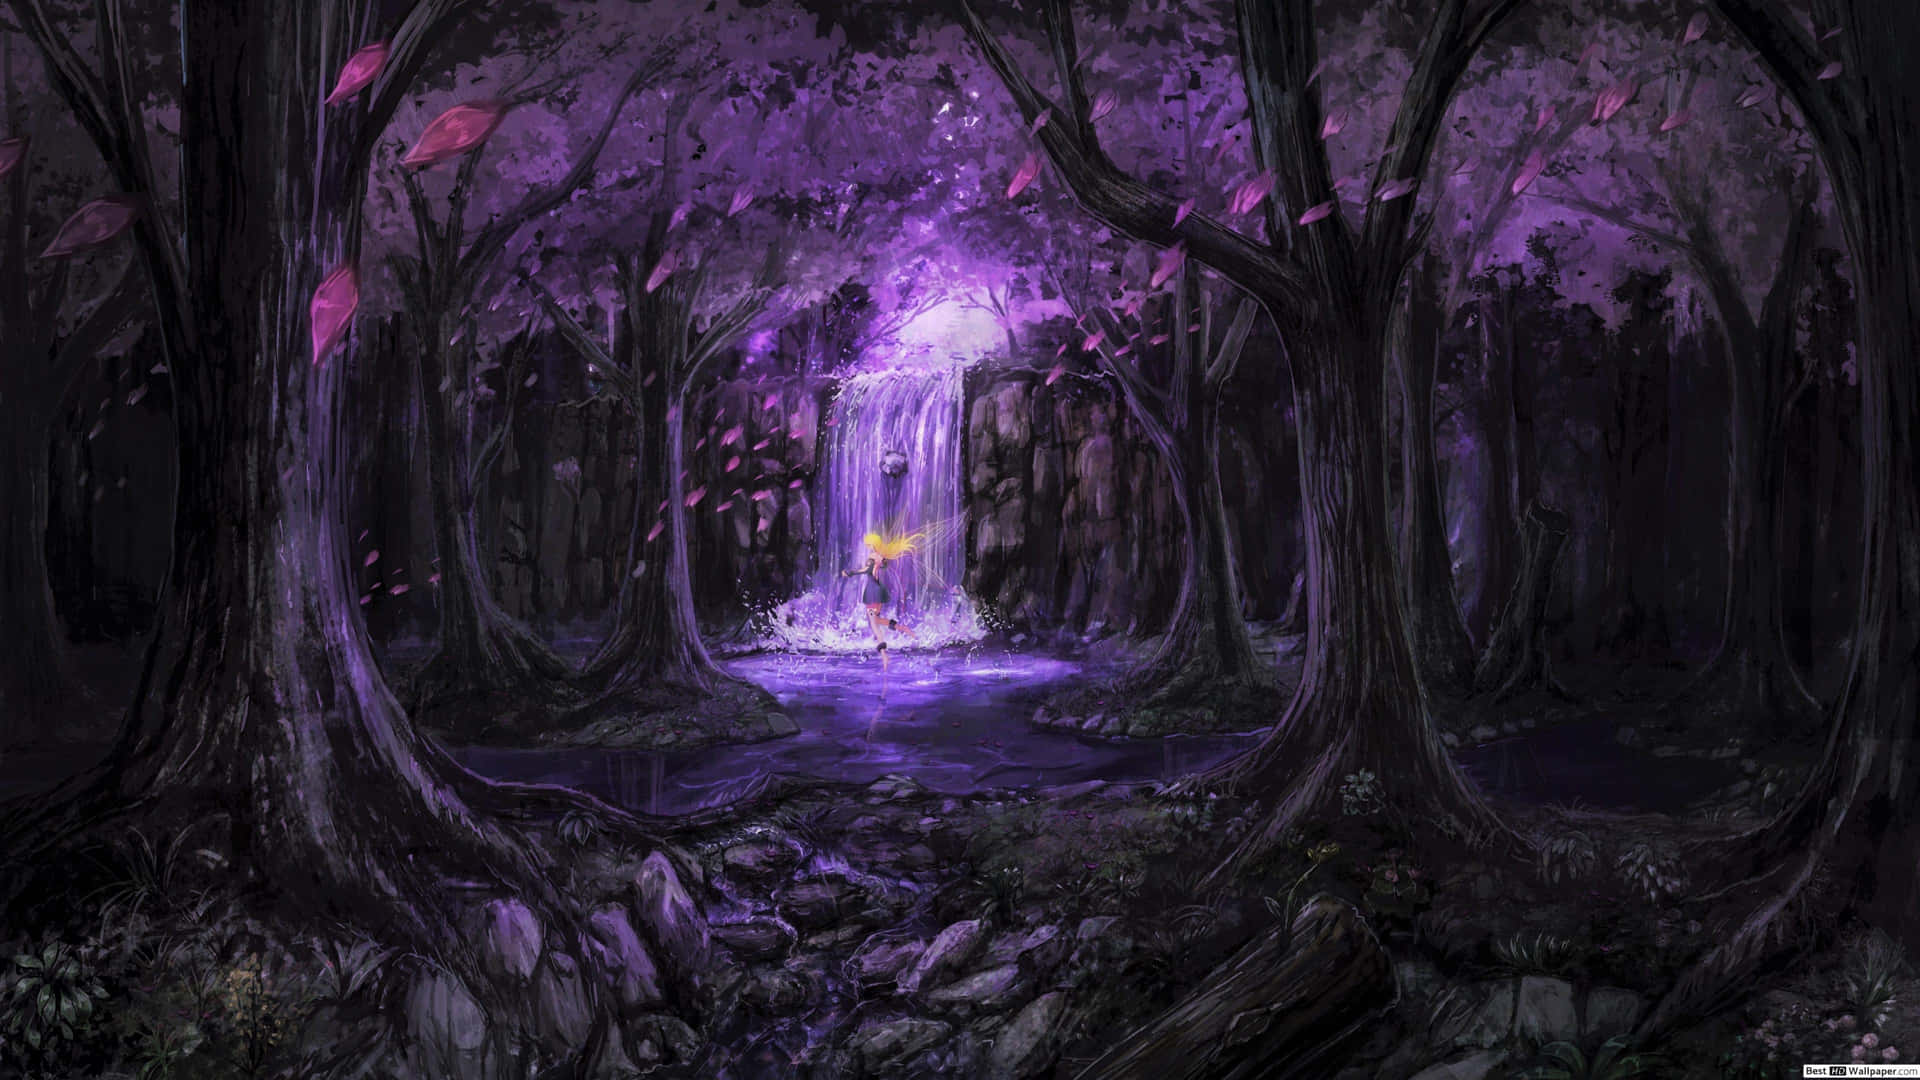 Explore the enchanted fairy forest, a magical place of beauty and mystery. Wallpaper